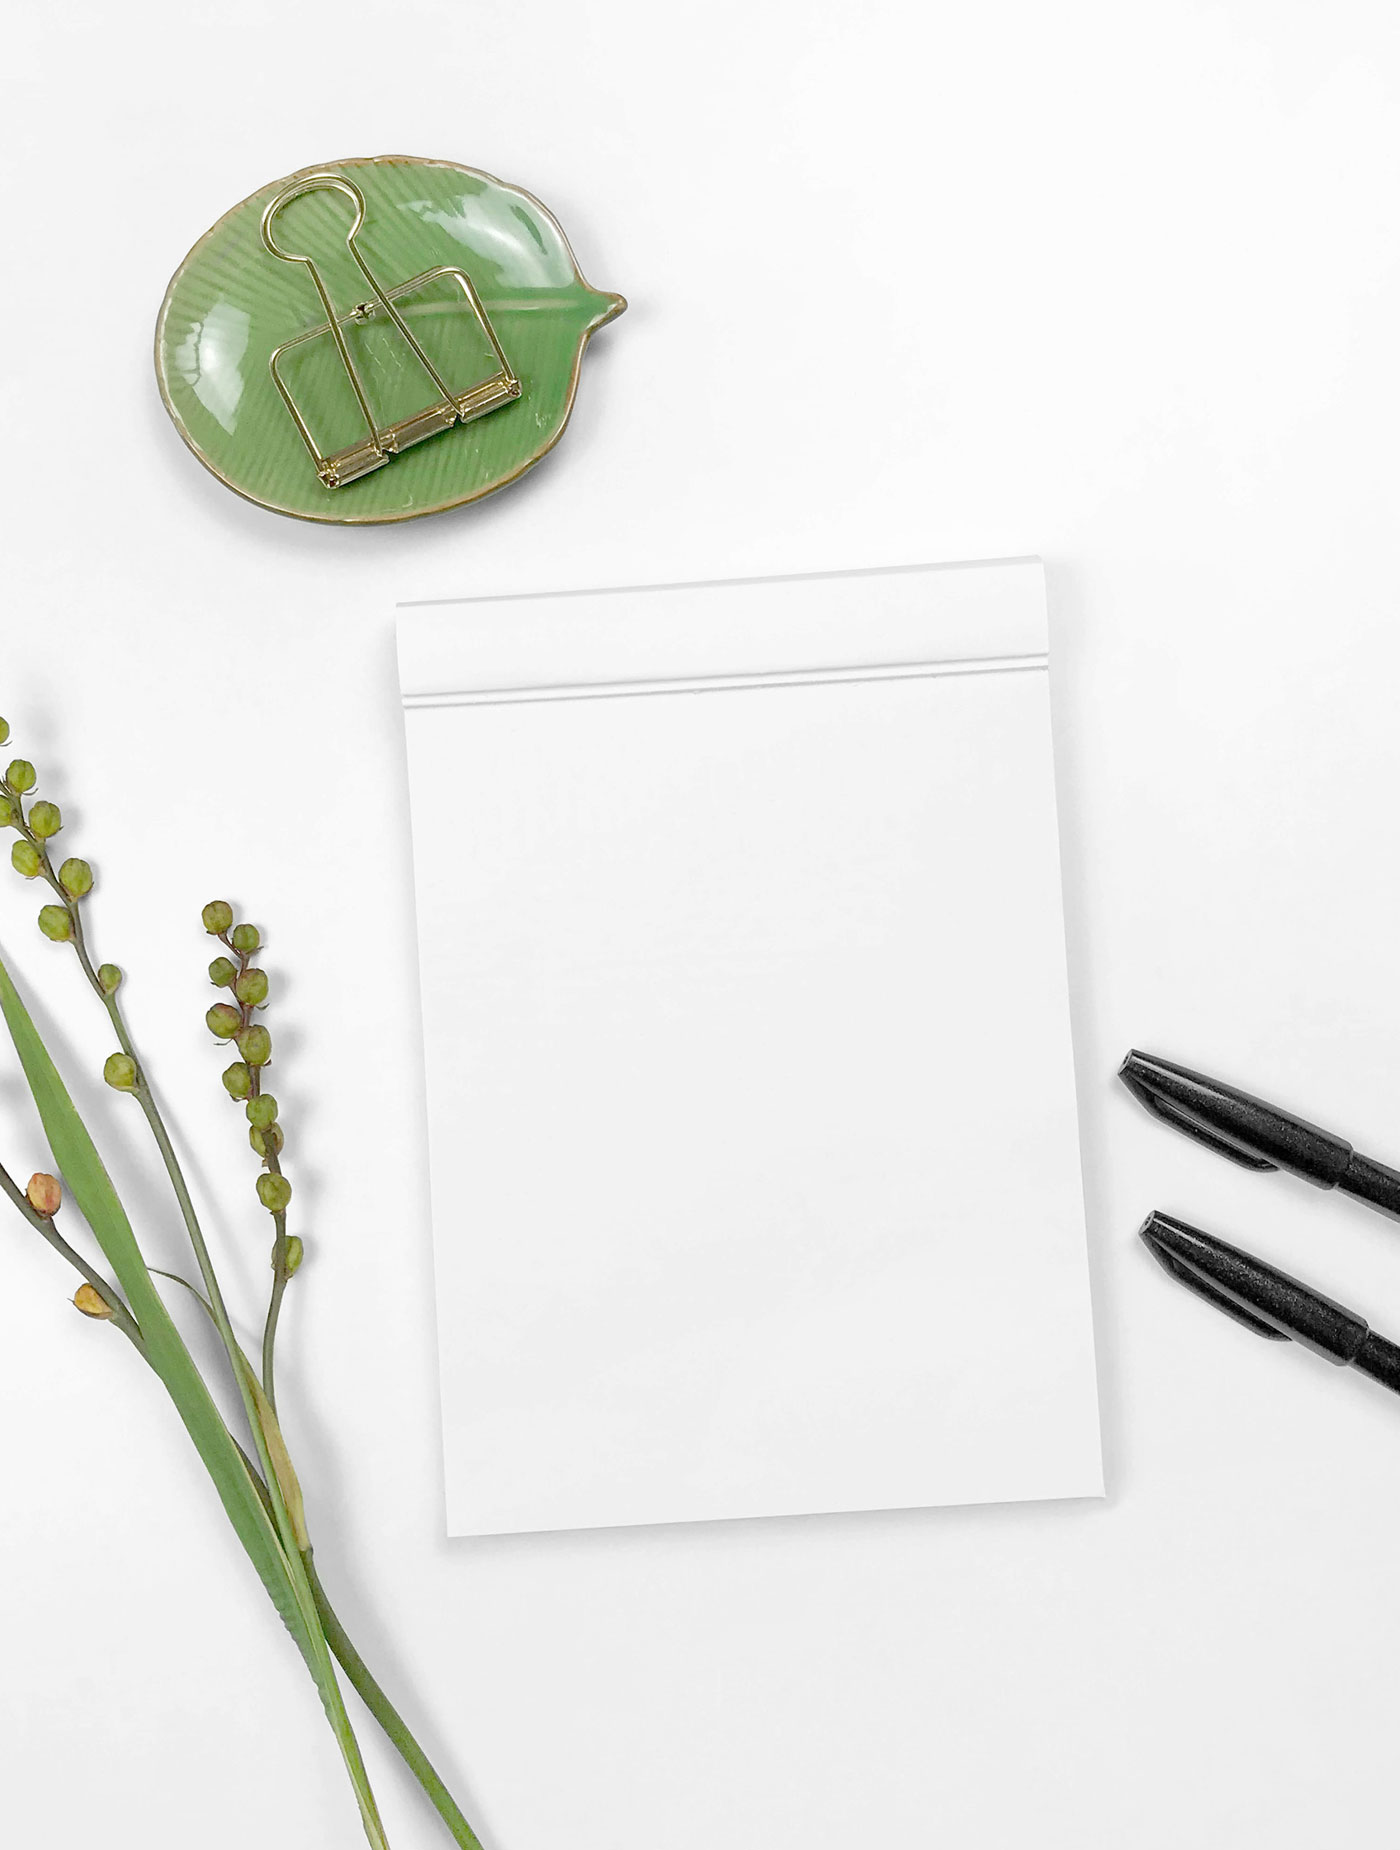 Open Notebook With Similar Items Surrounding Mockup FREE PSD